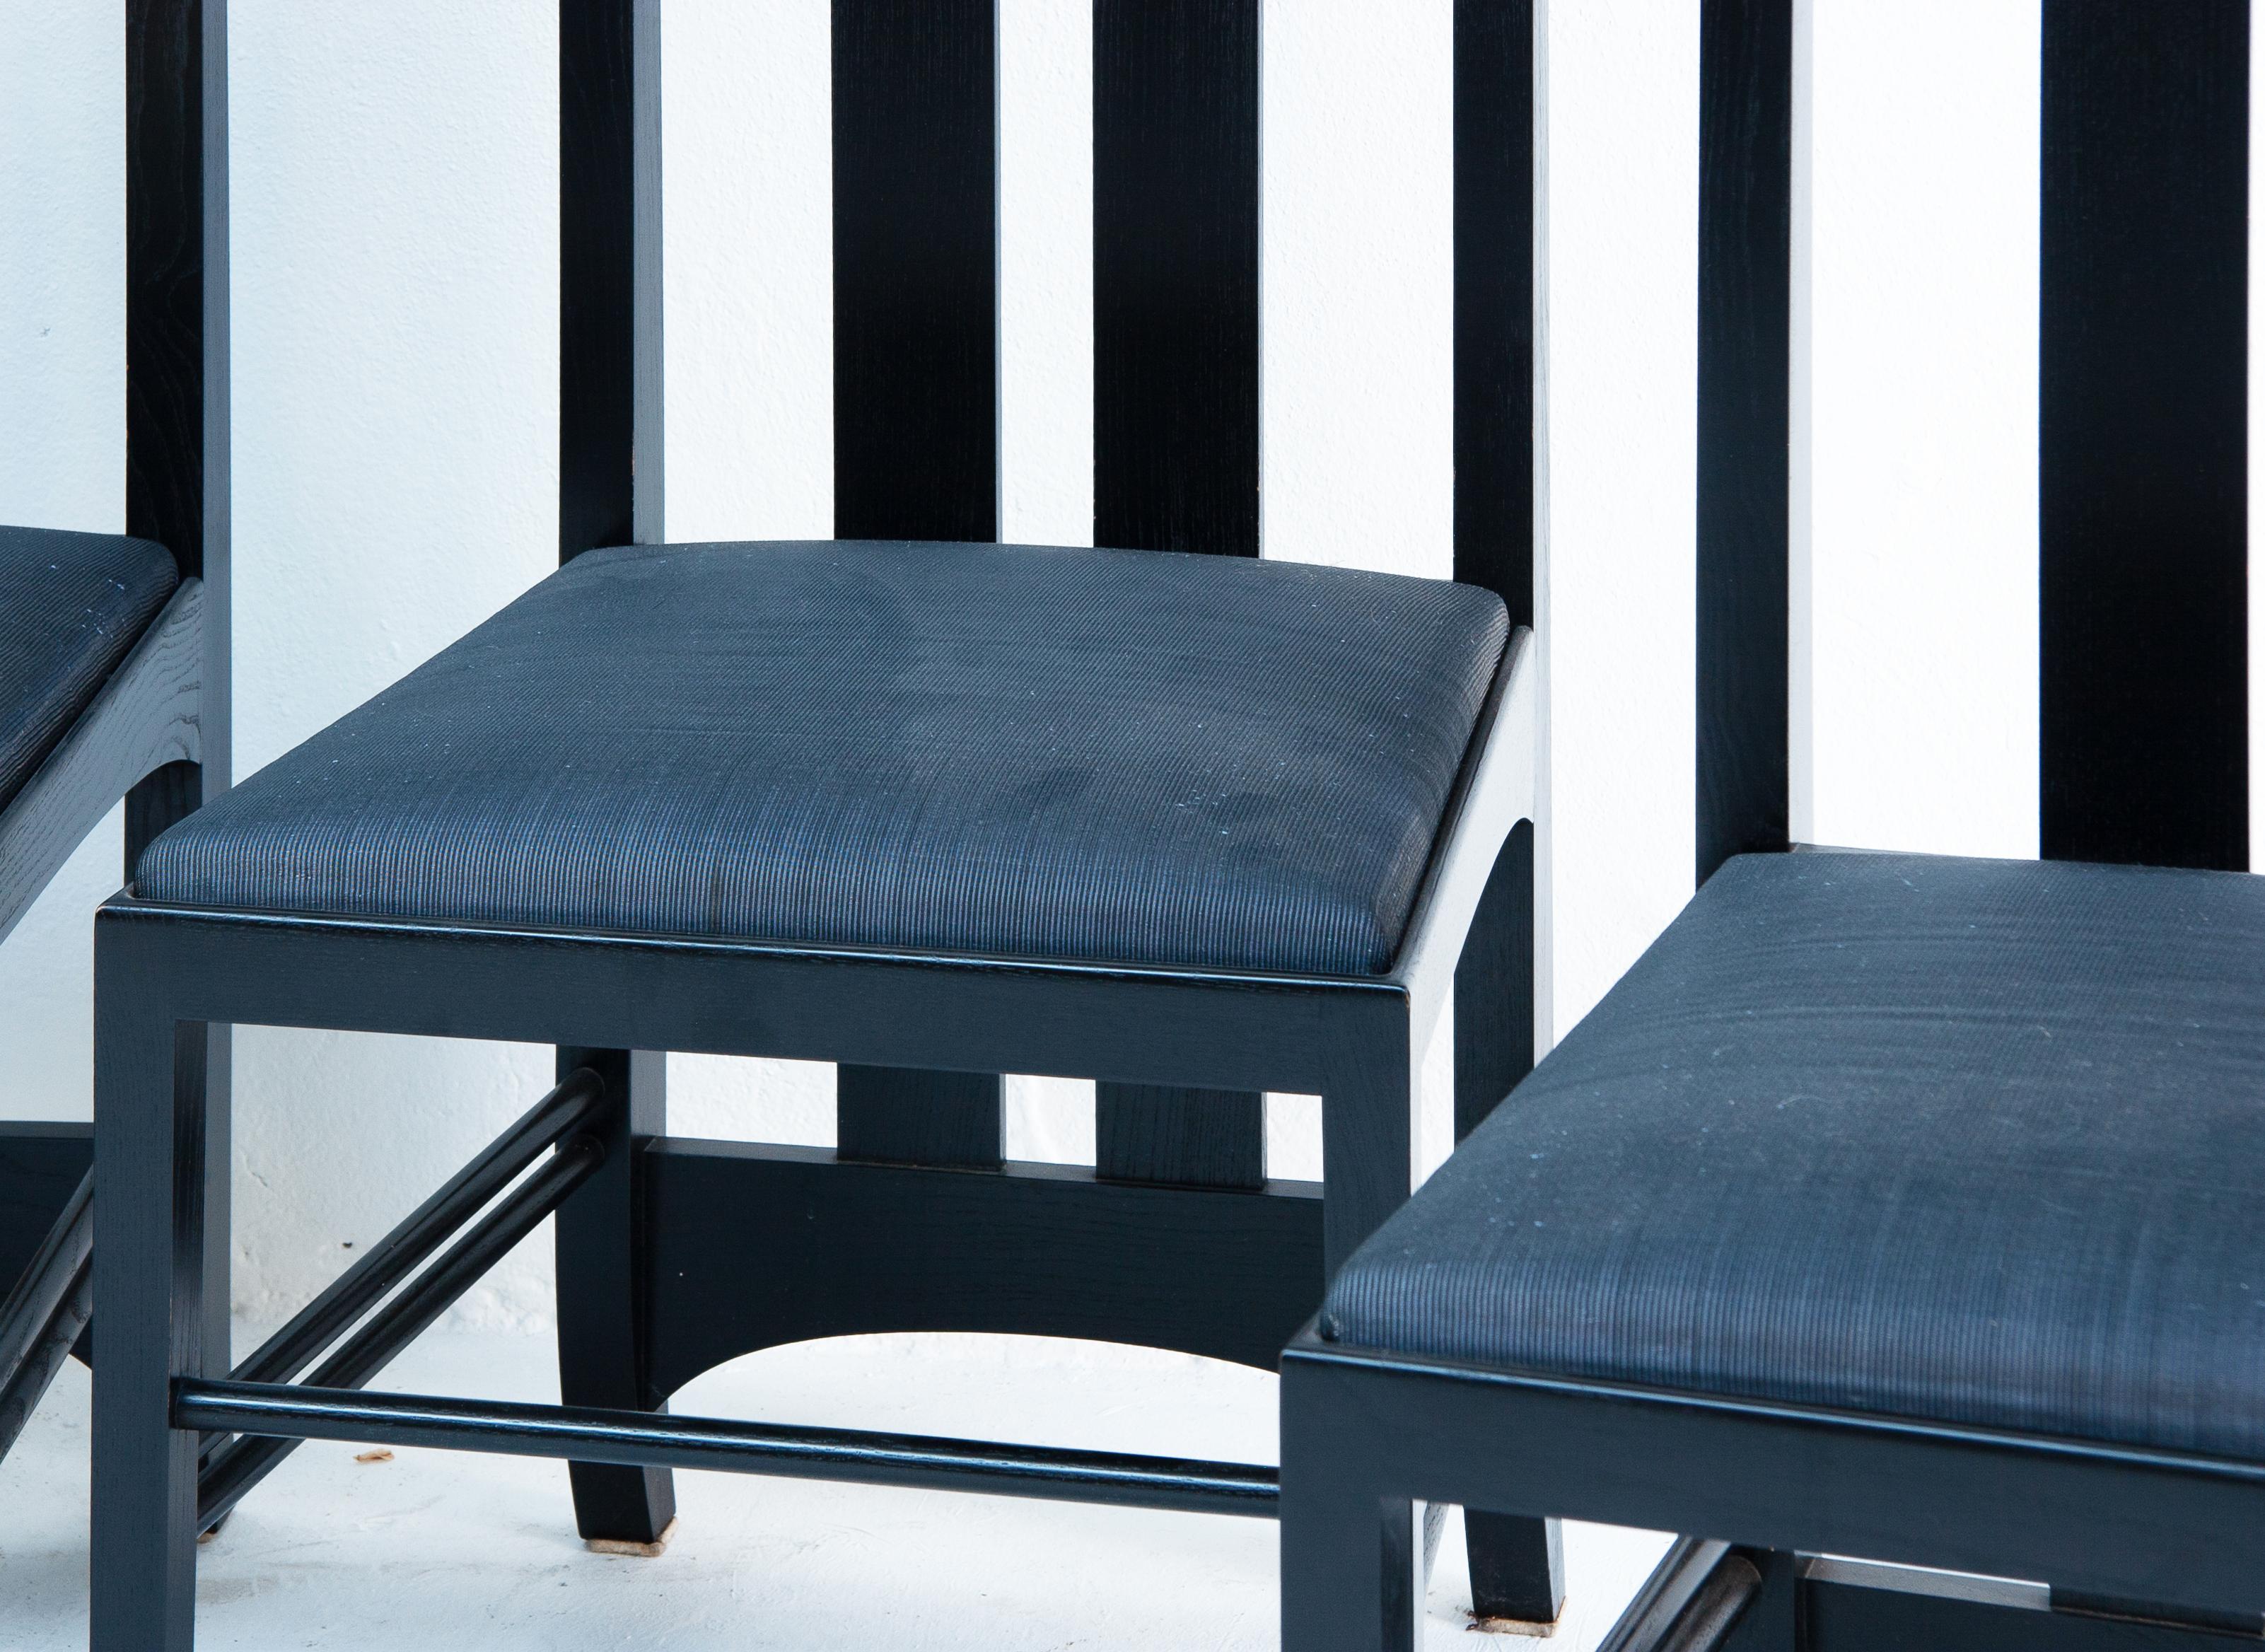 The Ingram Mackintosh chairs for Cassina are a collection of high back chairs designed by Charles Rennie Mackintosh. These chairs were produced posthumously, around 1970. Cassina, the renowned furniture company, manufactured these chairs using solid